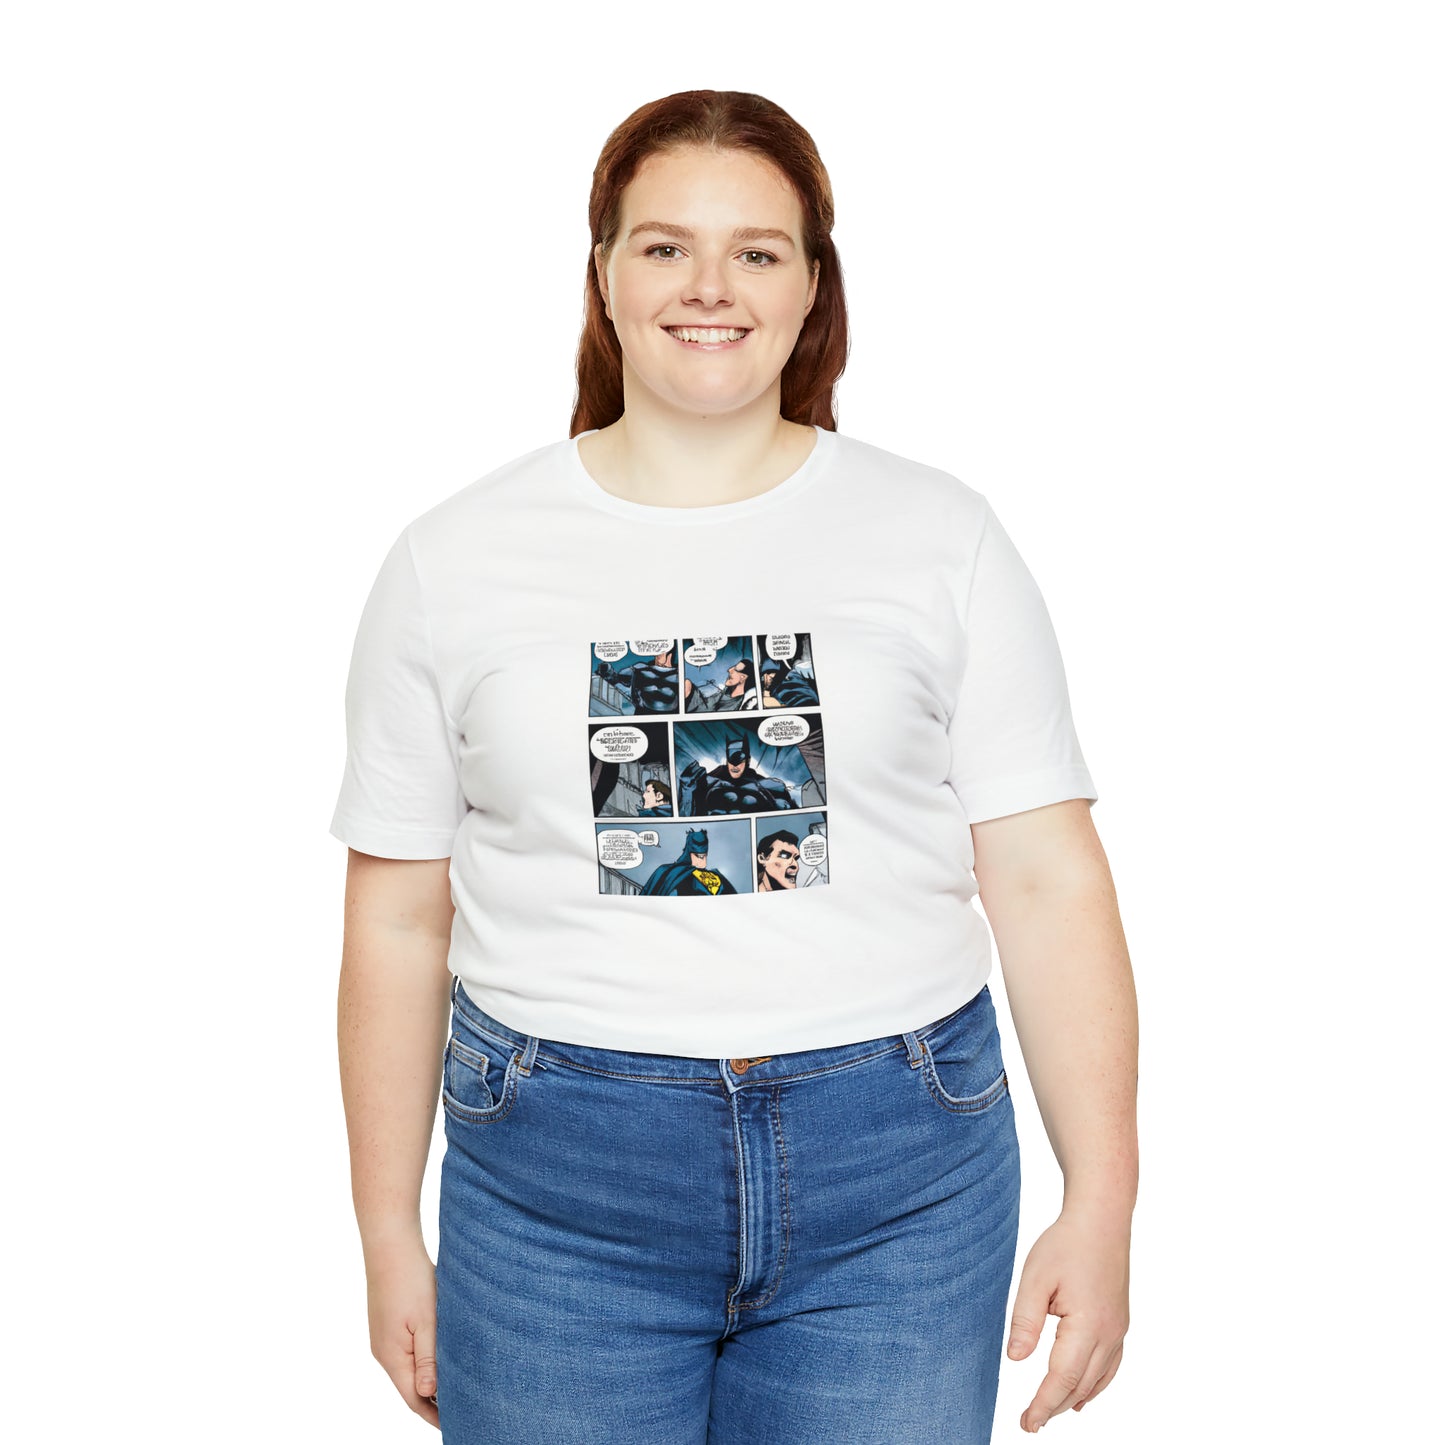 Winston Feathers - Comic Book Collector Tee Shirt